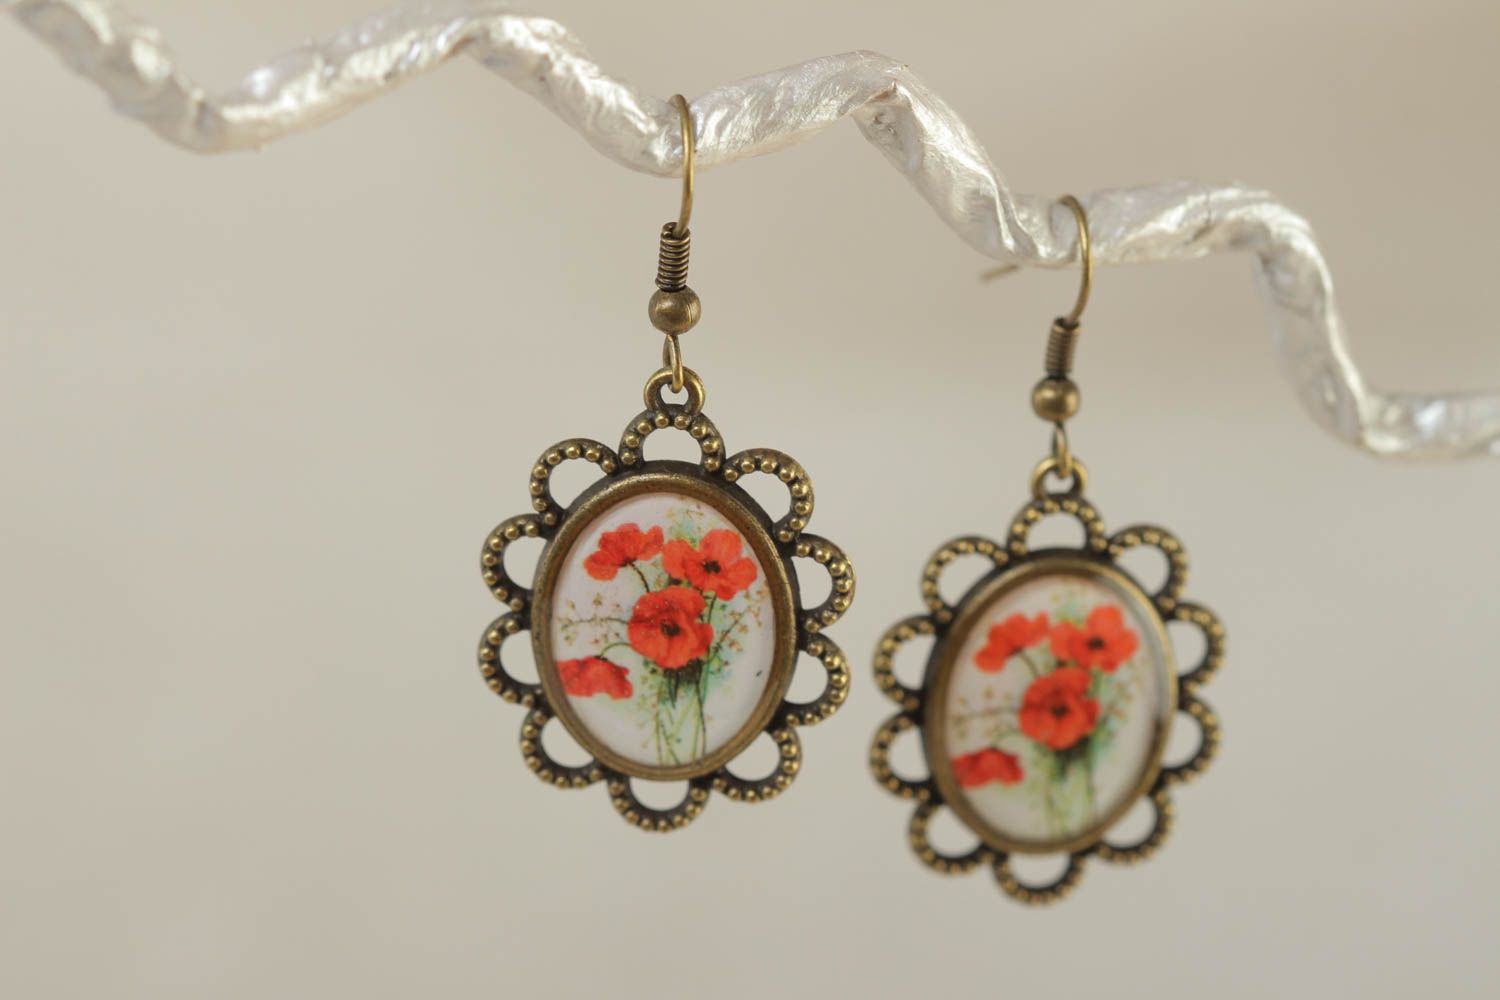 Handmade oval dangling earrings with lacy metal basis and poppy flowers image photo 1